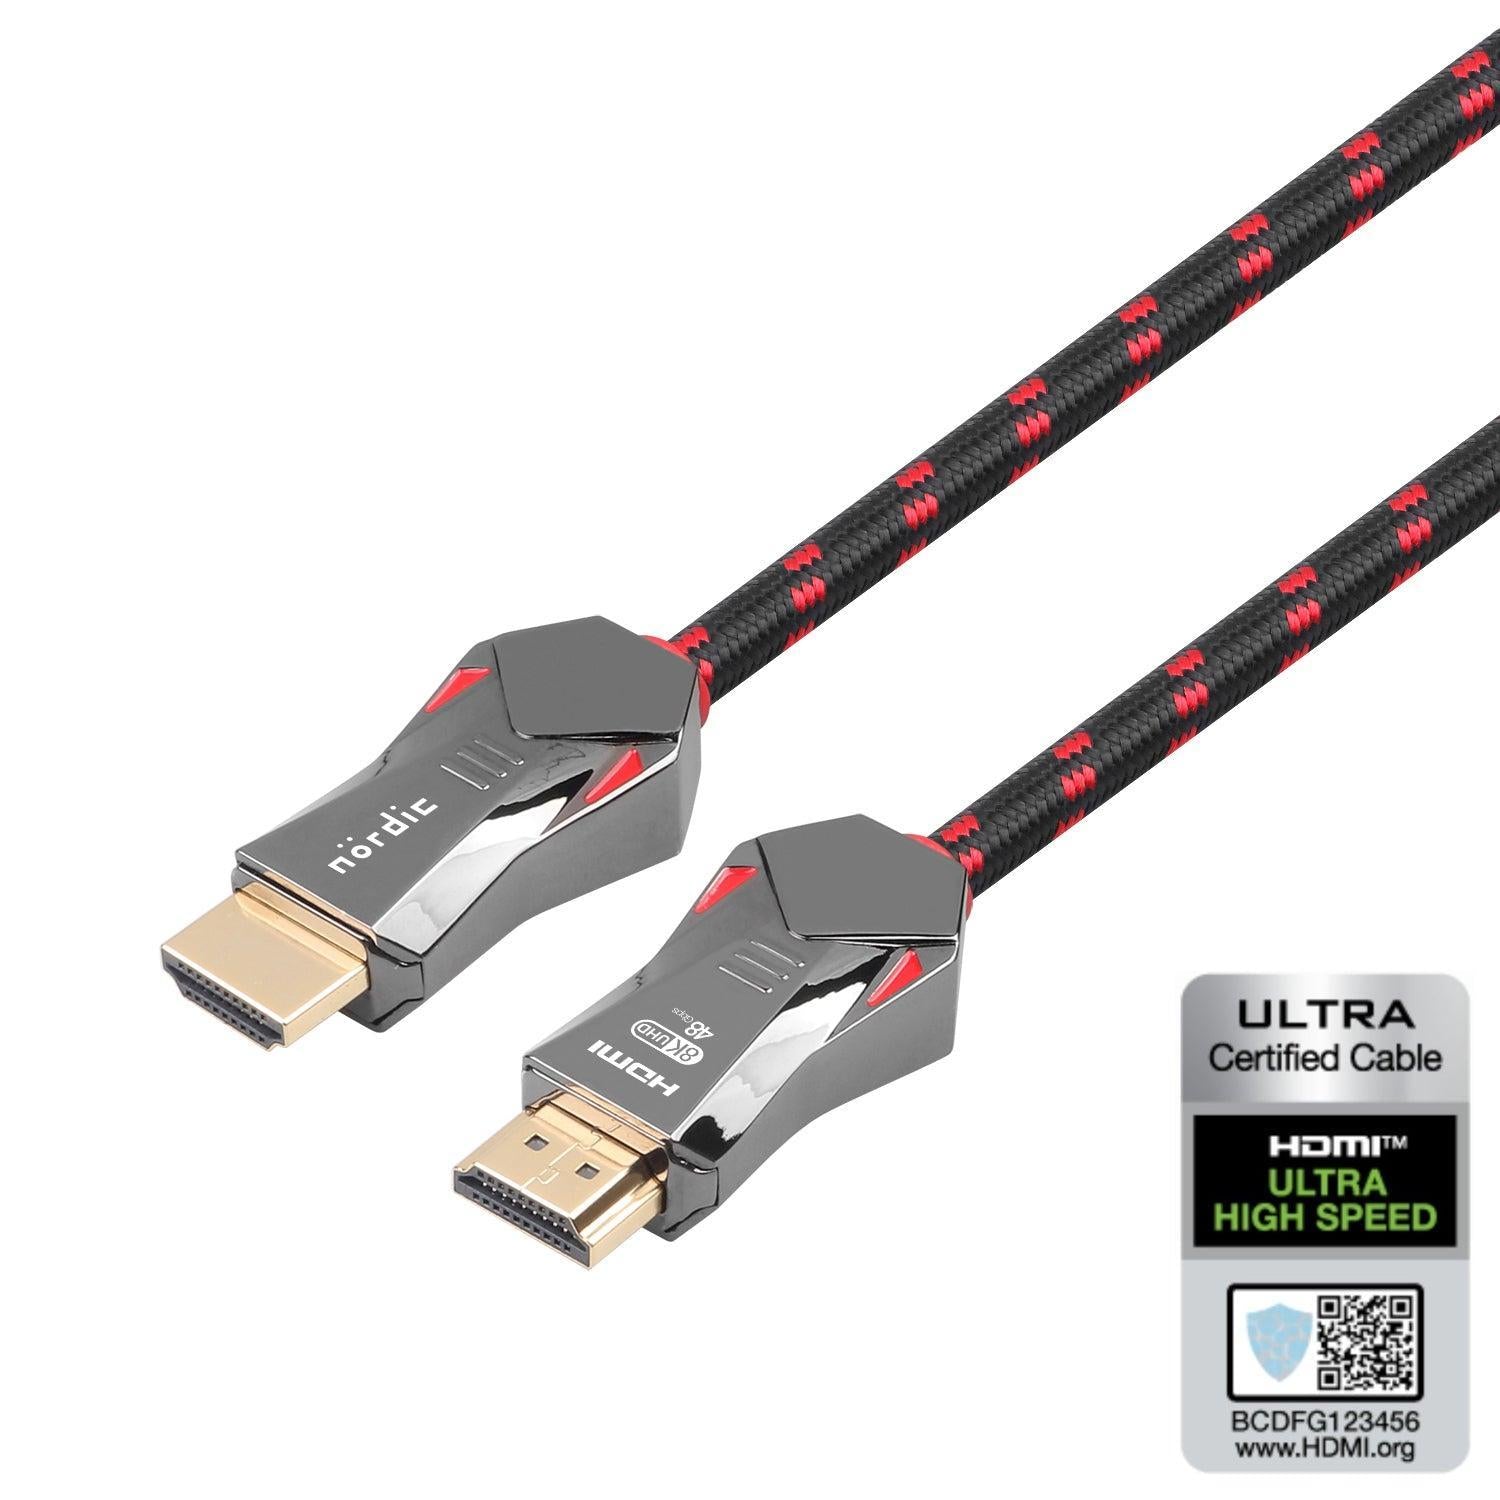 NORDIC CERTIFIED CABLES 1,5m Ultra High Speed HDMI 2.1 8K 60Hz 4K 120H